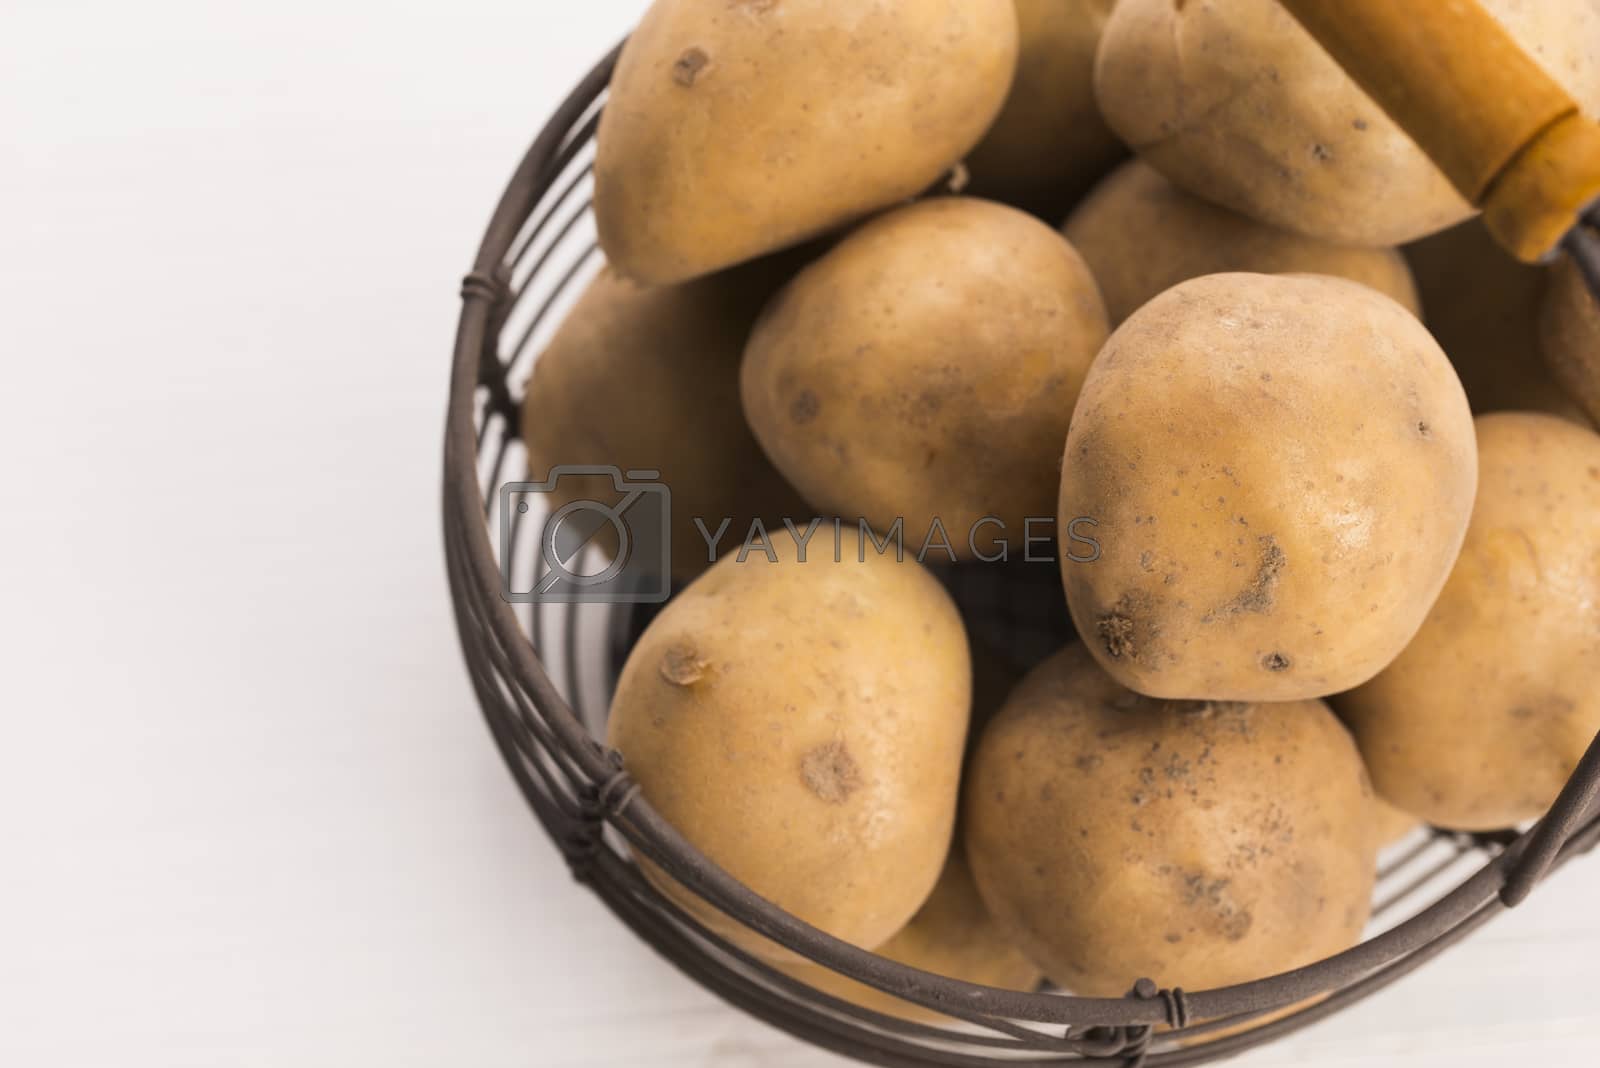 Royalty free image of uncooked potatoes in wire basket by joannawnuk